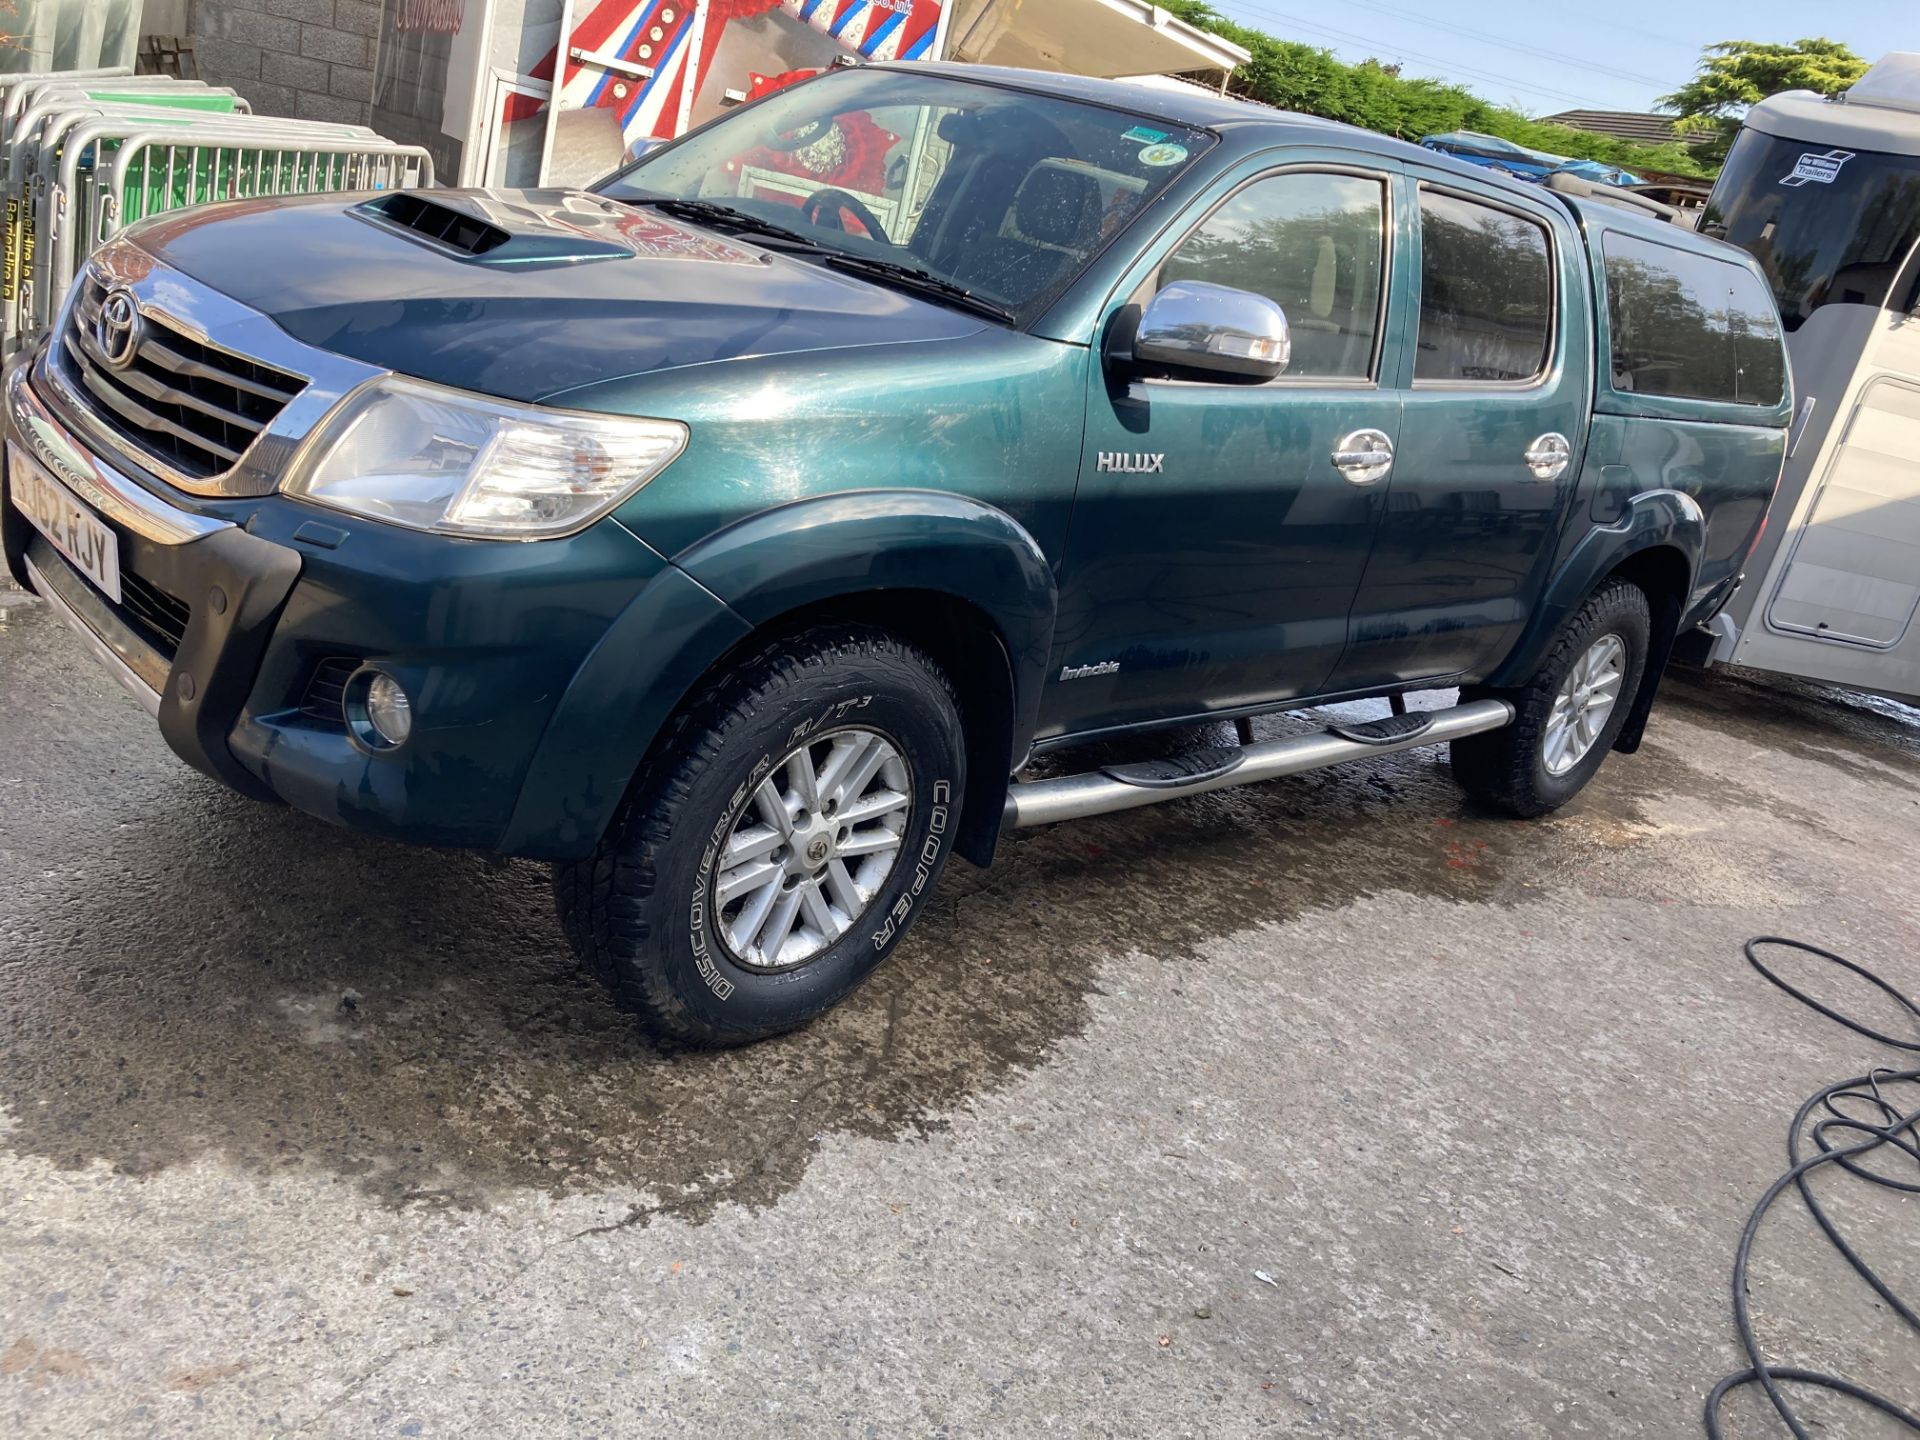 2012 TOYOTA HILUX INVINCIBLE. LOCATION: NORTHERN IRELAND - Image 11 of 26